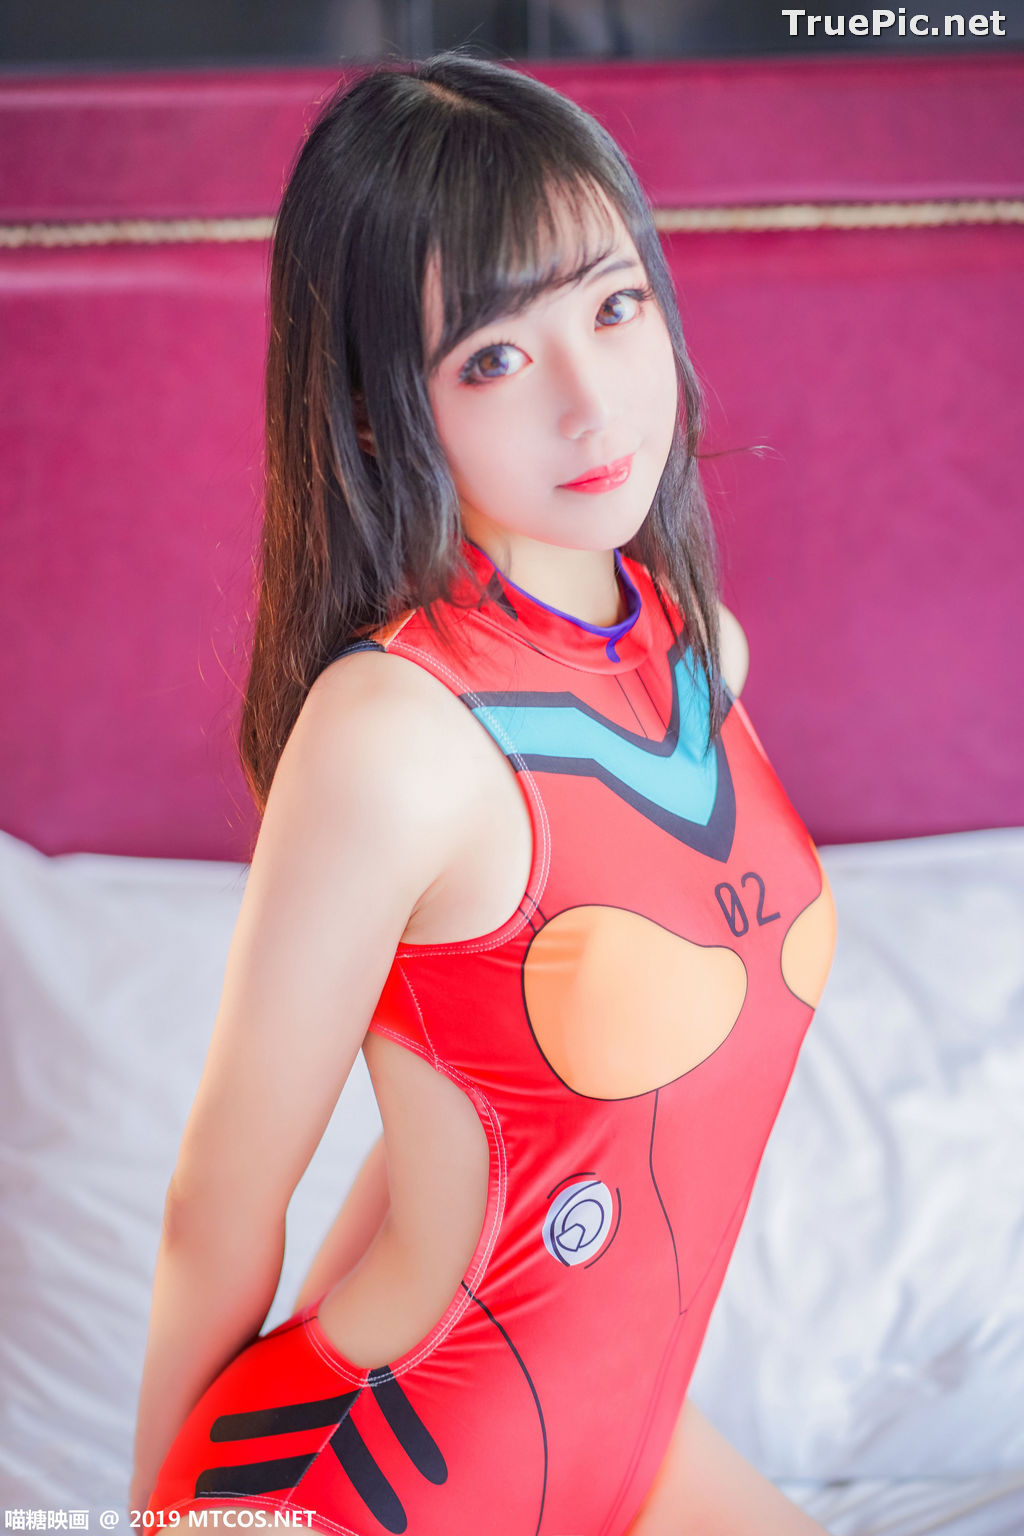 Image [MTCos] 喵糖映画 Vol.038 – Chinese Cute Model – Red Line Monokini - TruePic.net - Picture-34